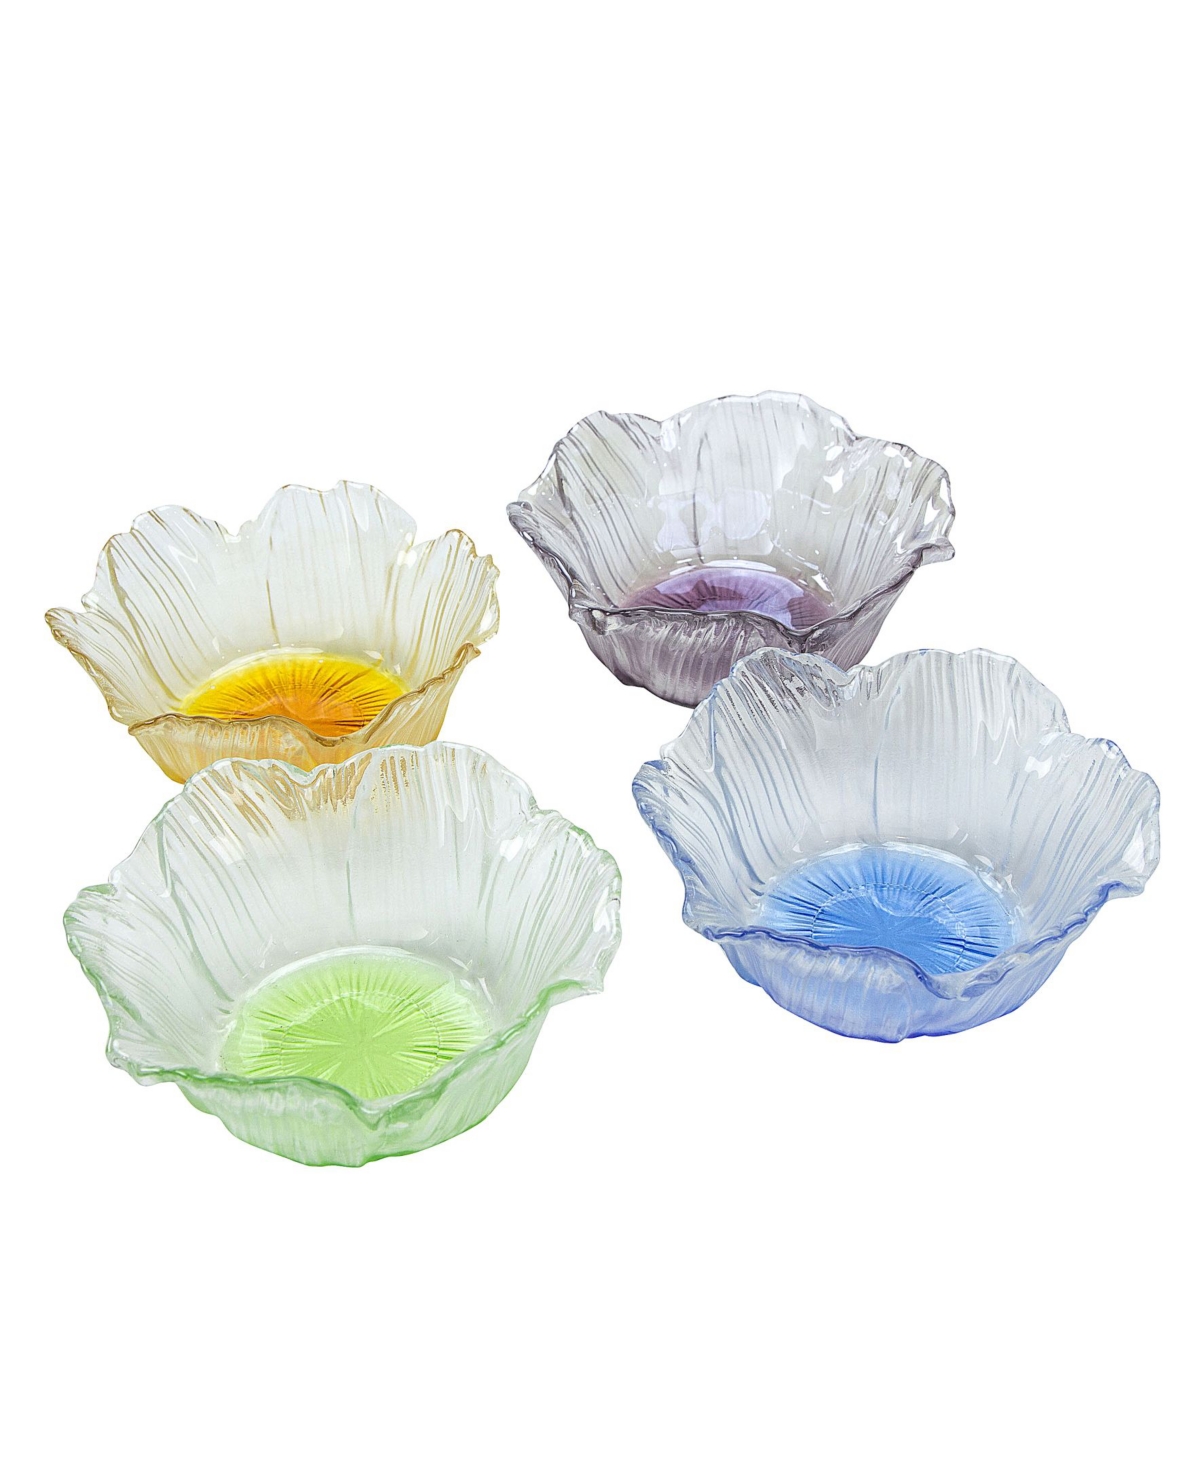 Dessert Bowls With Assorted Colors, Set Of 4 - Open Misce